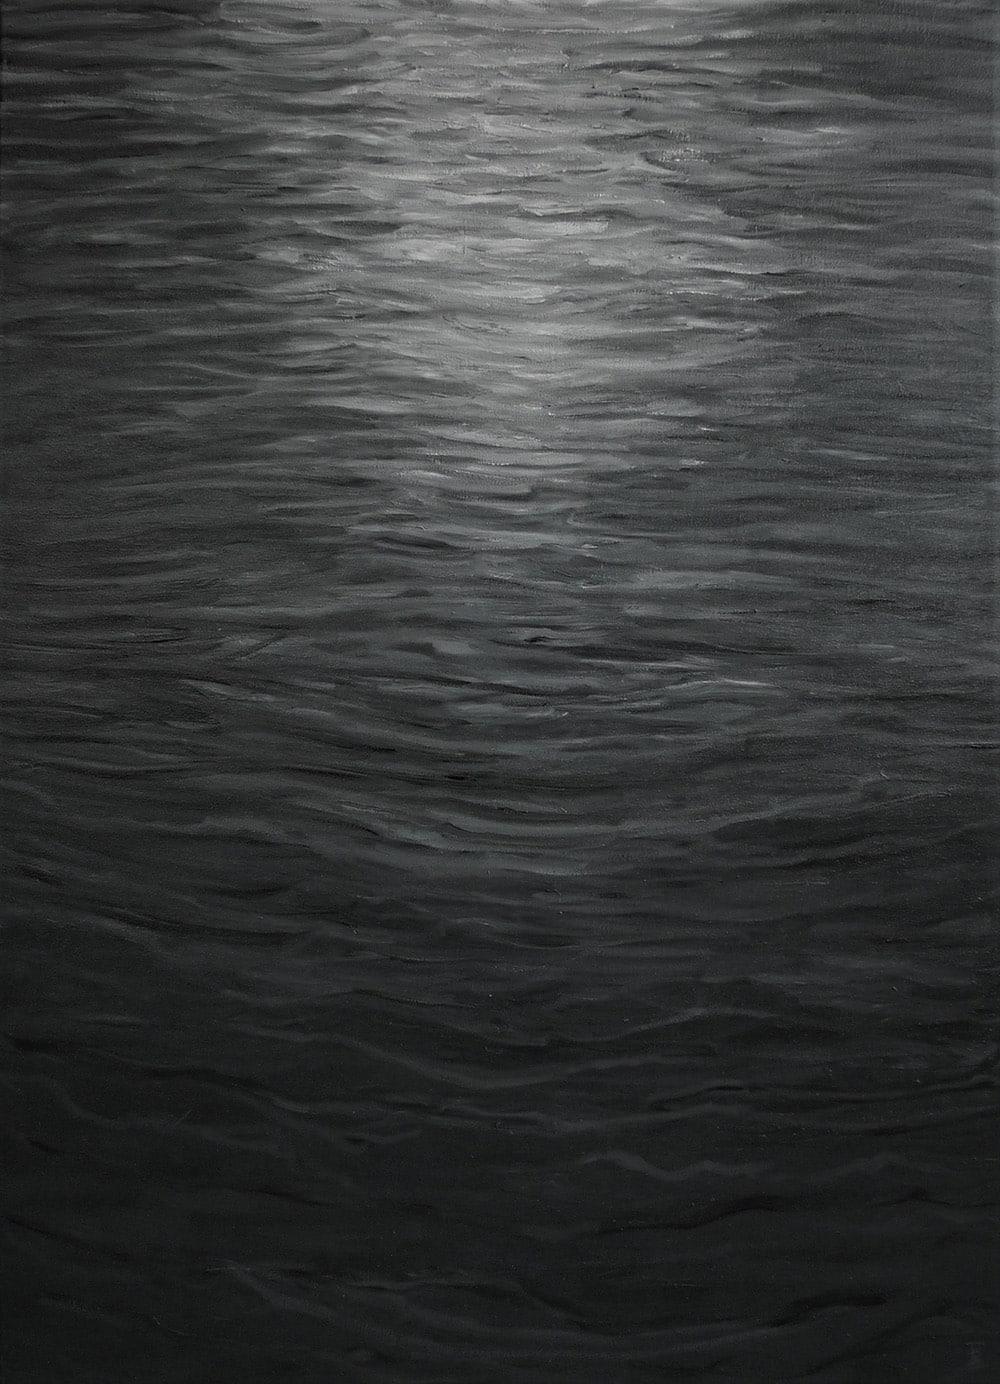 The water reflection is a unique oil on canvas painting by contemporary artist Franco Salas Borquez, dimensions are 100 cm x 73 cm (39.4 × 28.7 in).
The artwork is signed, sold unframed and comes with a certificate of authenticity.

Franco Salas